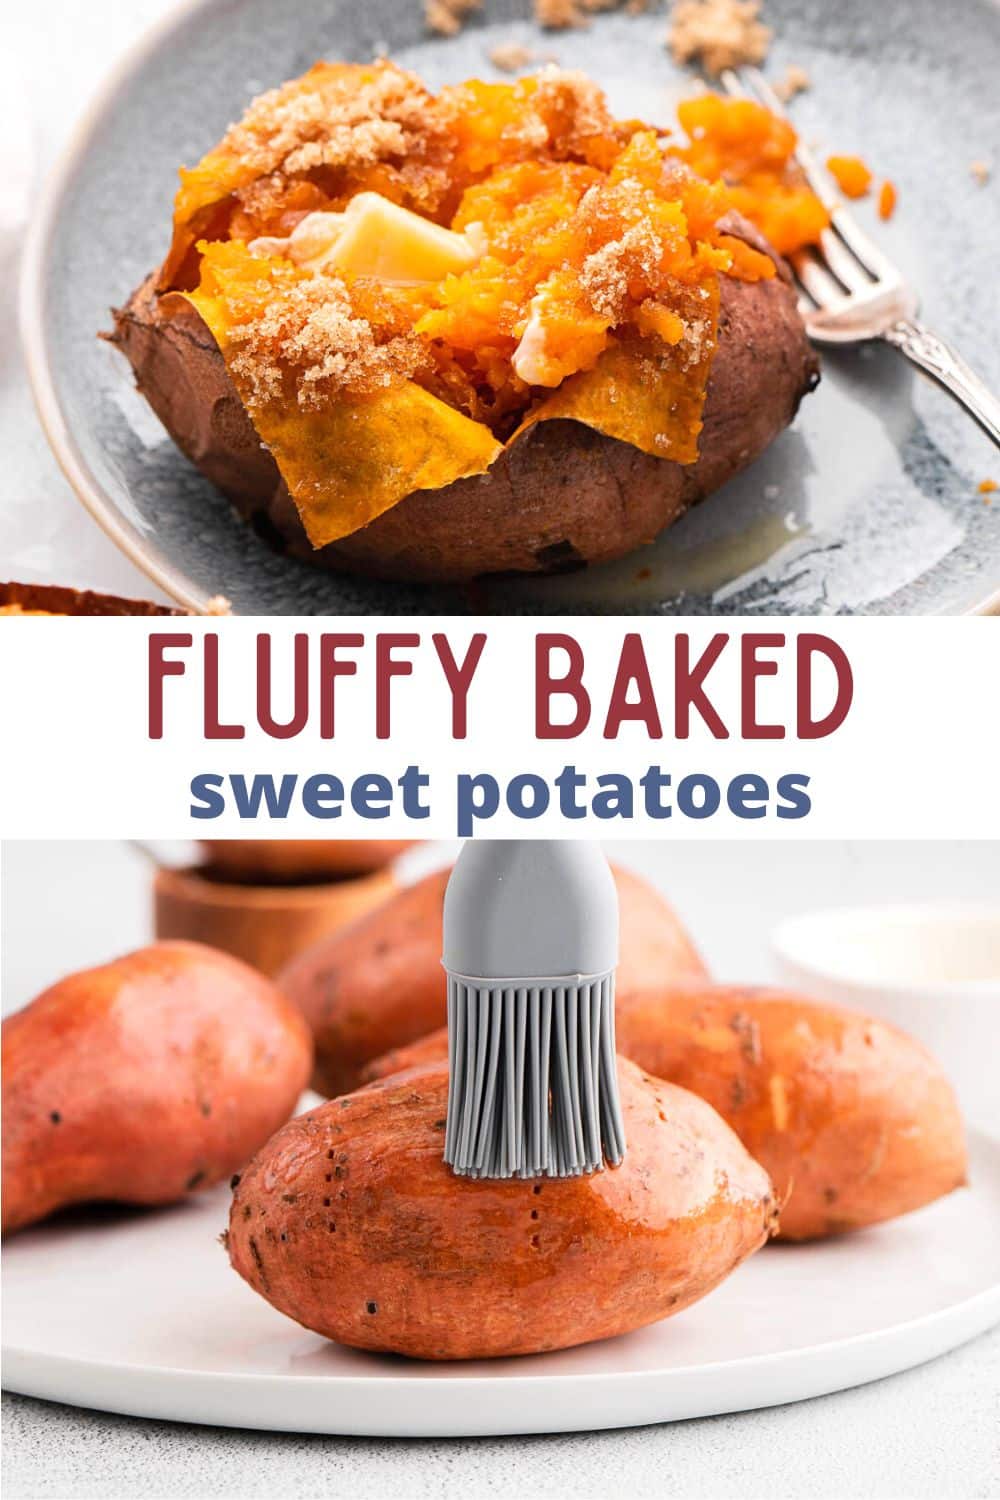 The easiest baked sweet potato recipe with minimal prep, resulting in a perfectly fluffy inside texture. Serve sweet with butter and a sprinkle of sugar, or savory with salt and pepper. Your taste buds are sure to be delighted and your mealtime stress-free!